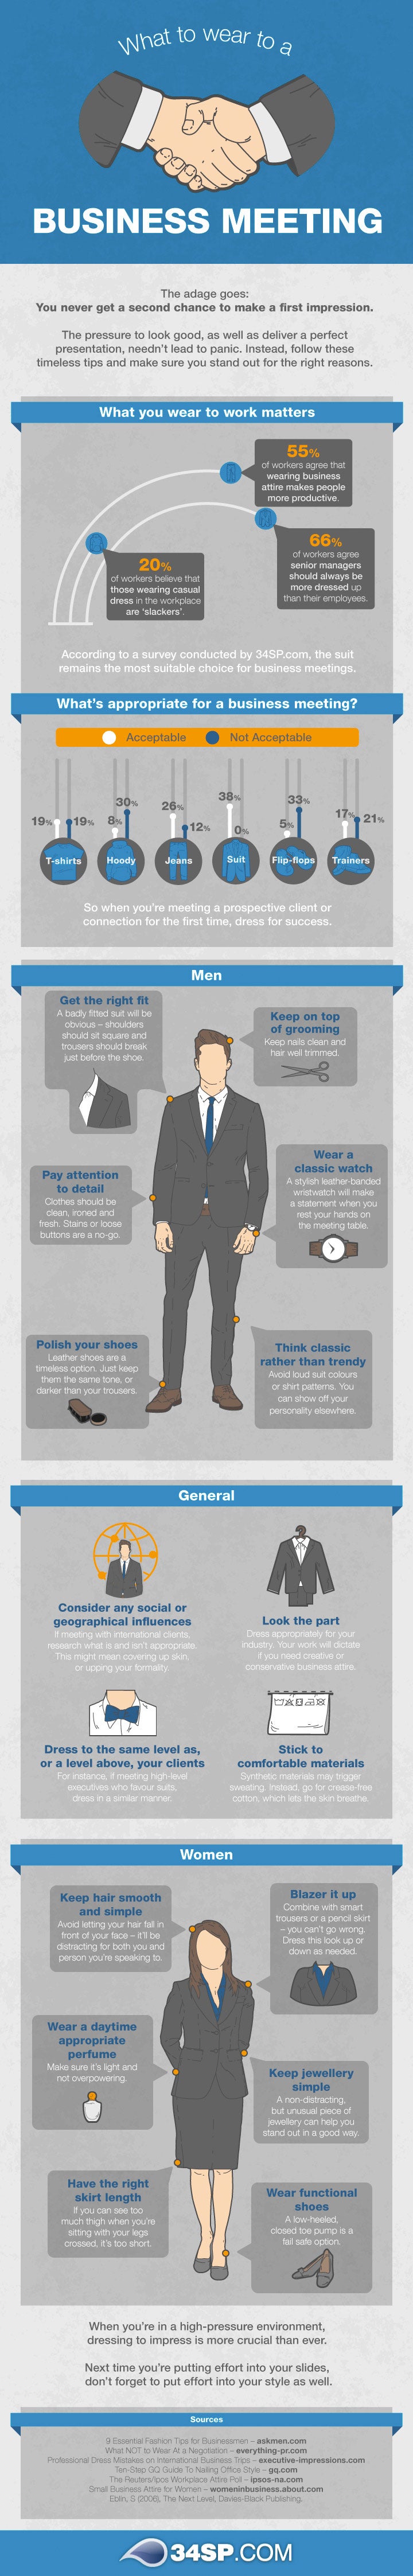 How to Dress for a Business Meeting